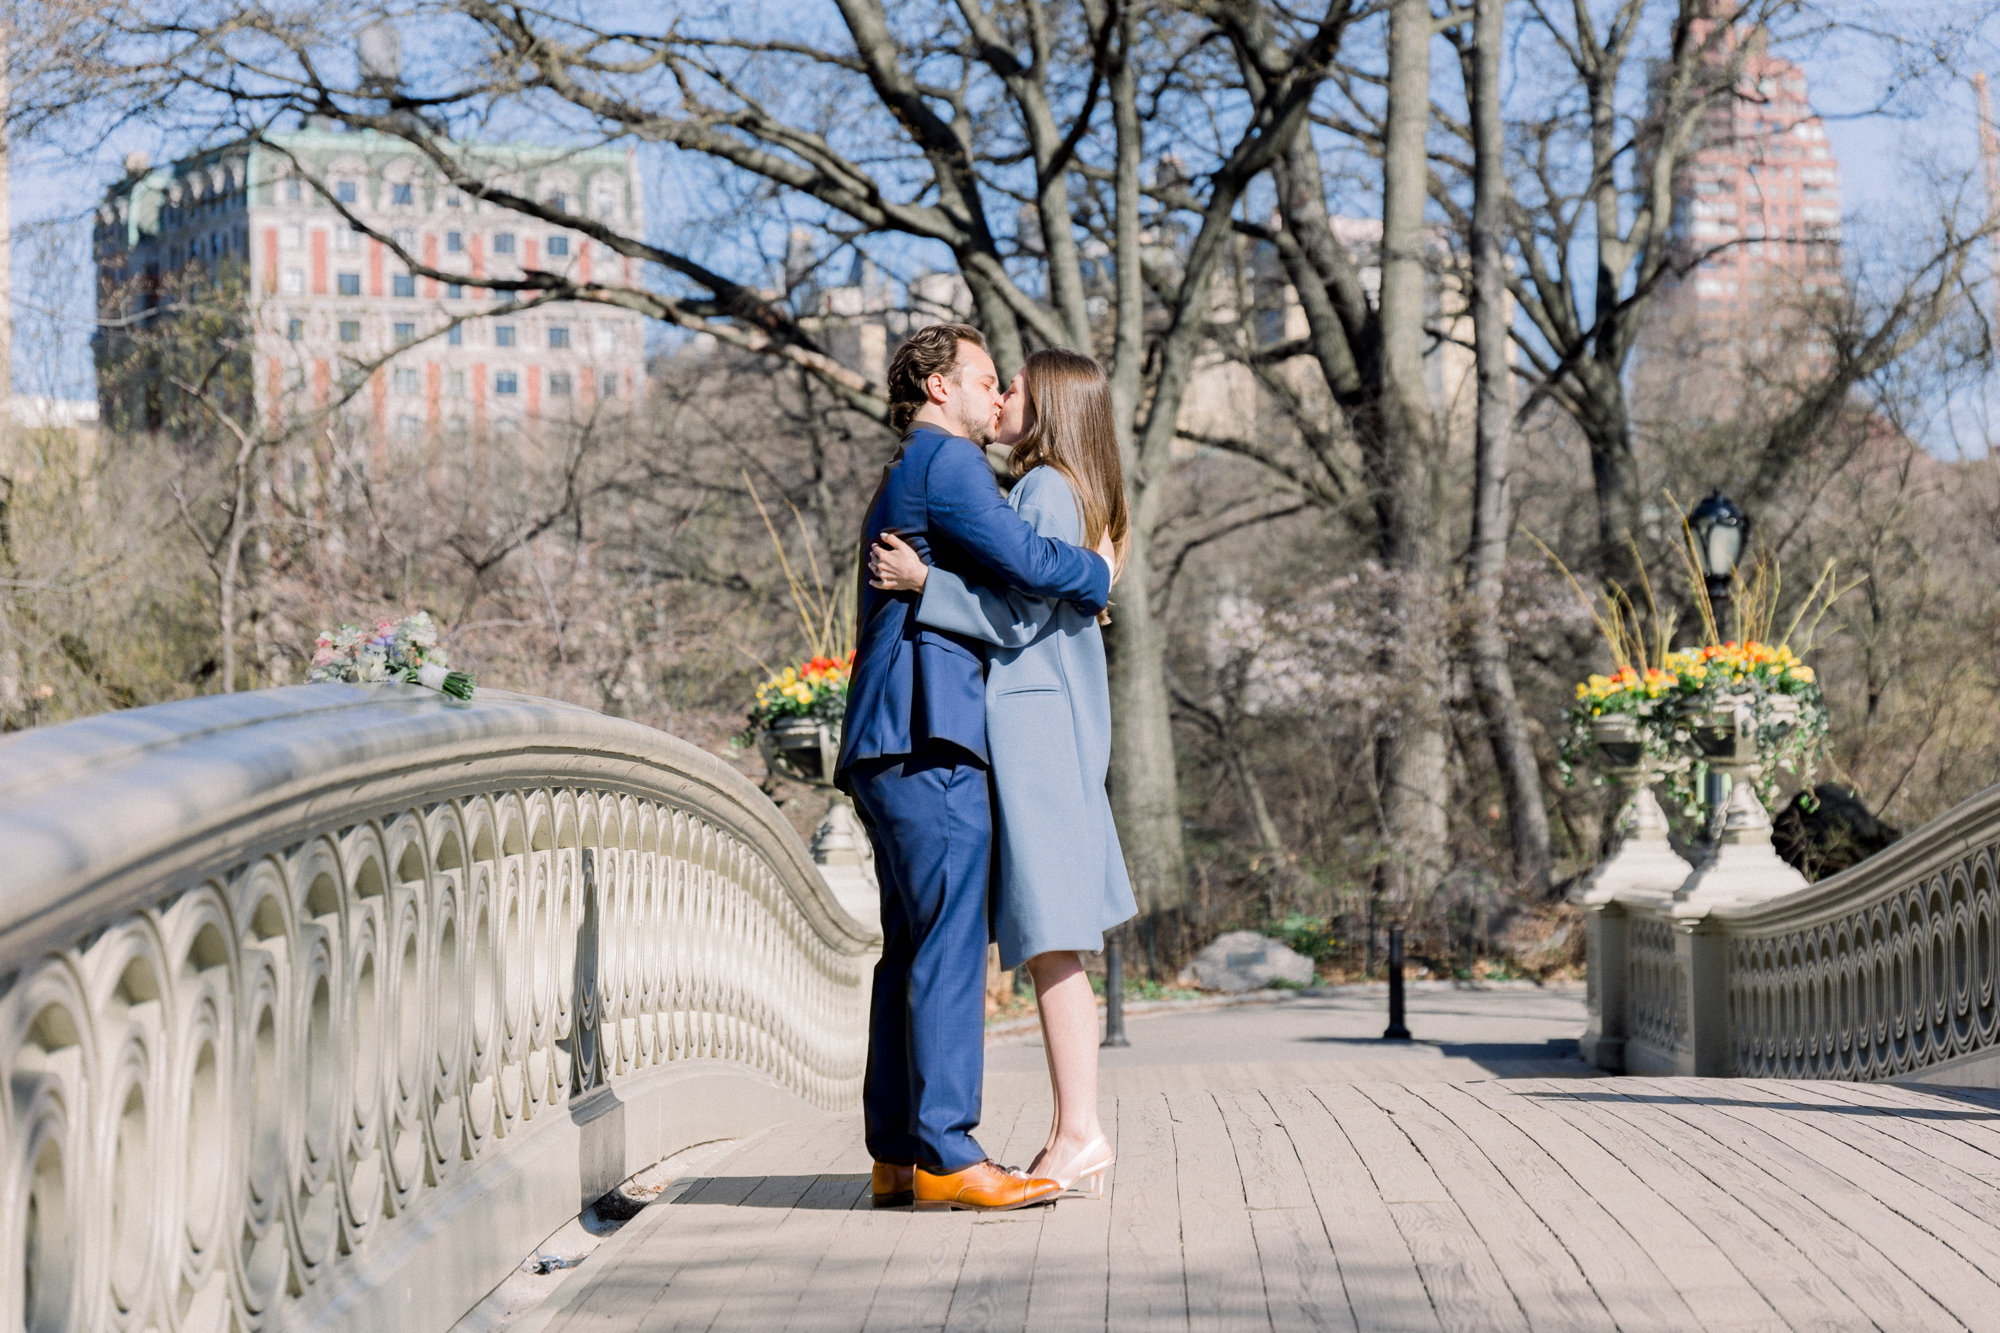 Perfect Spring Bow Bridge Wedding in Central Park Among the Cherry Blossoms